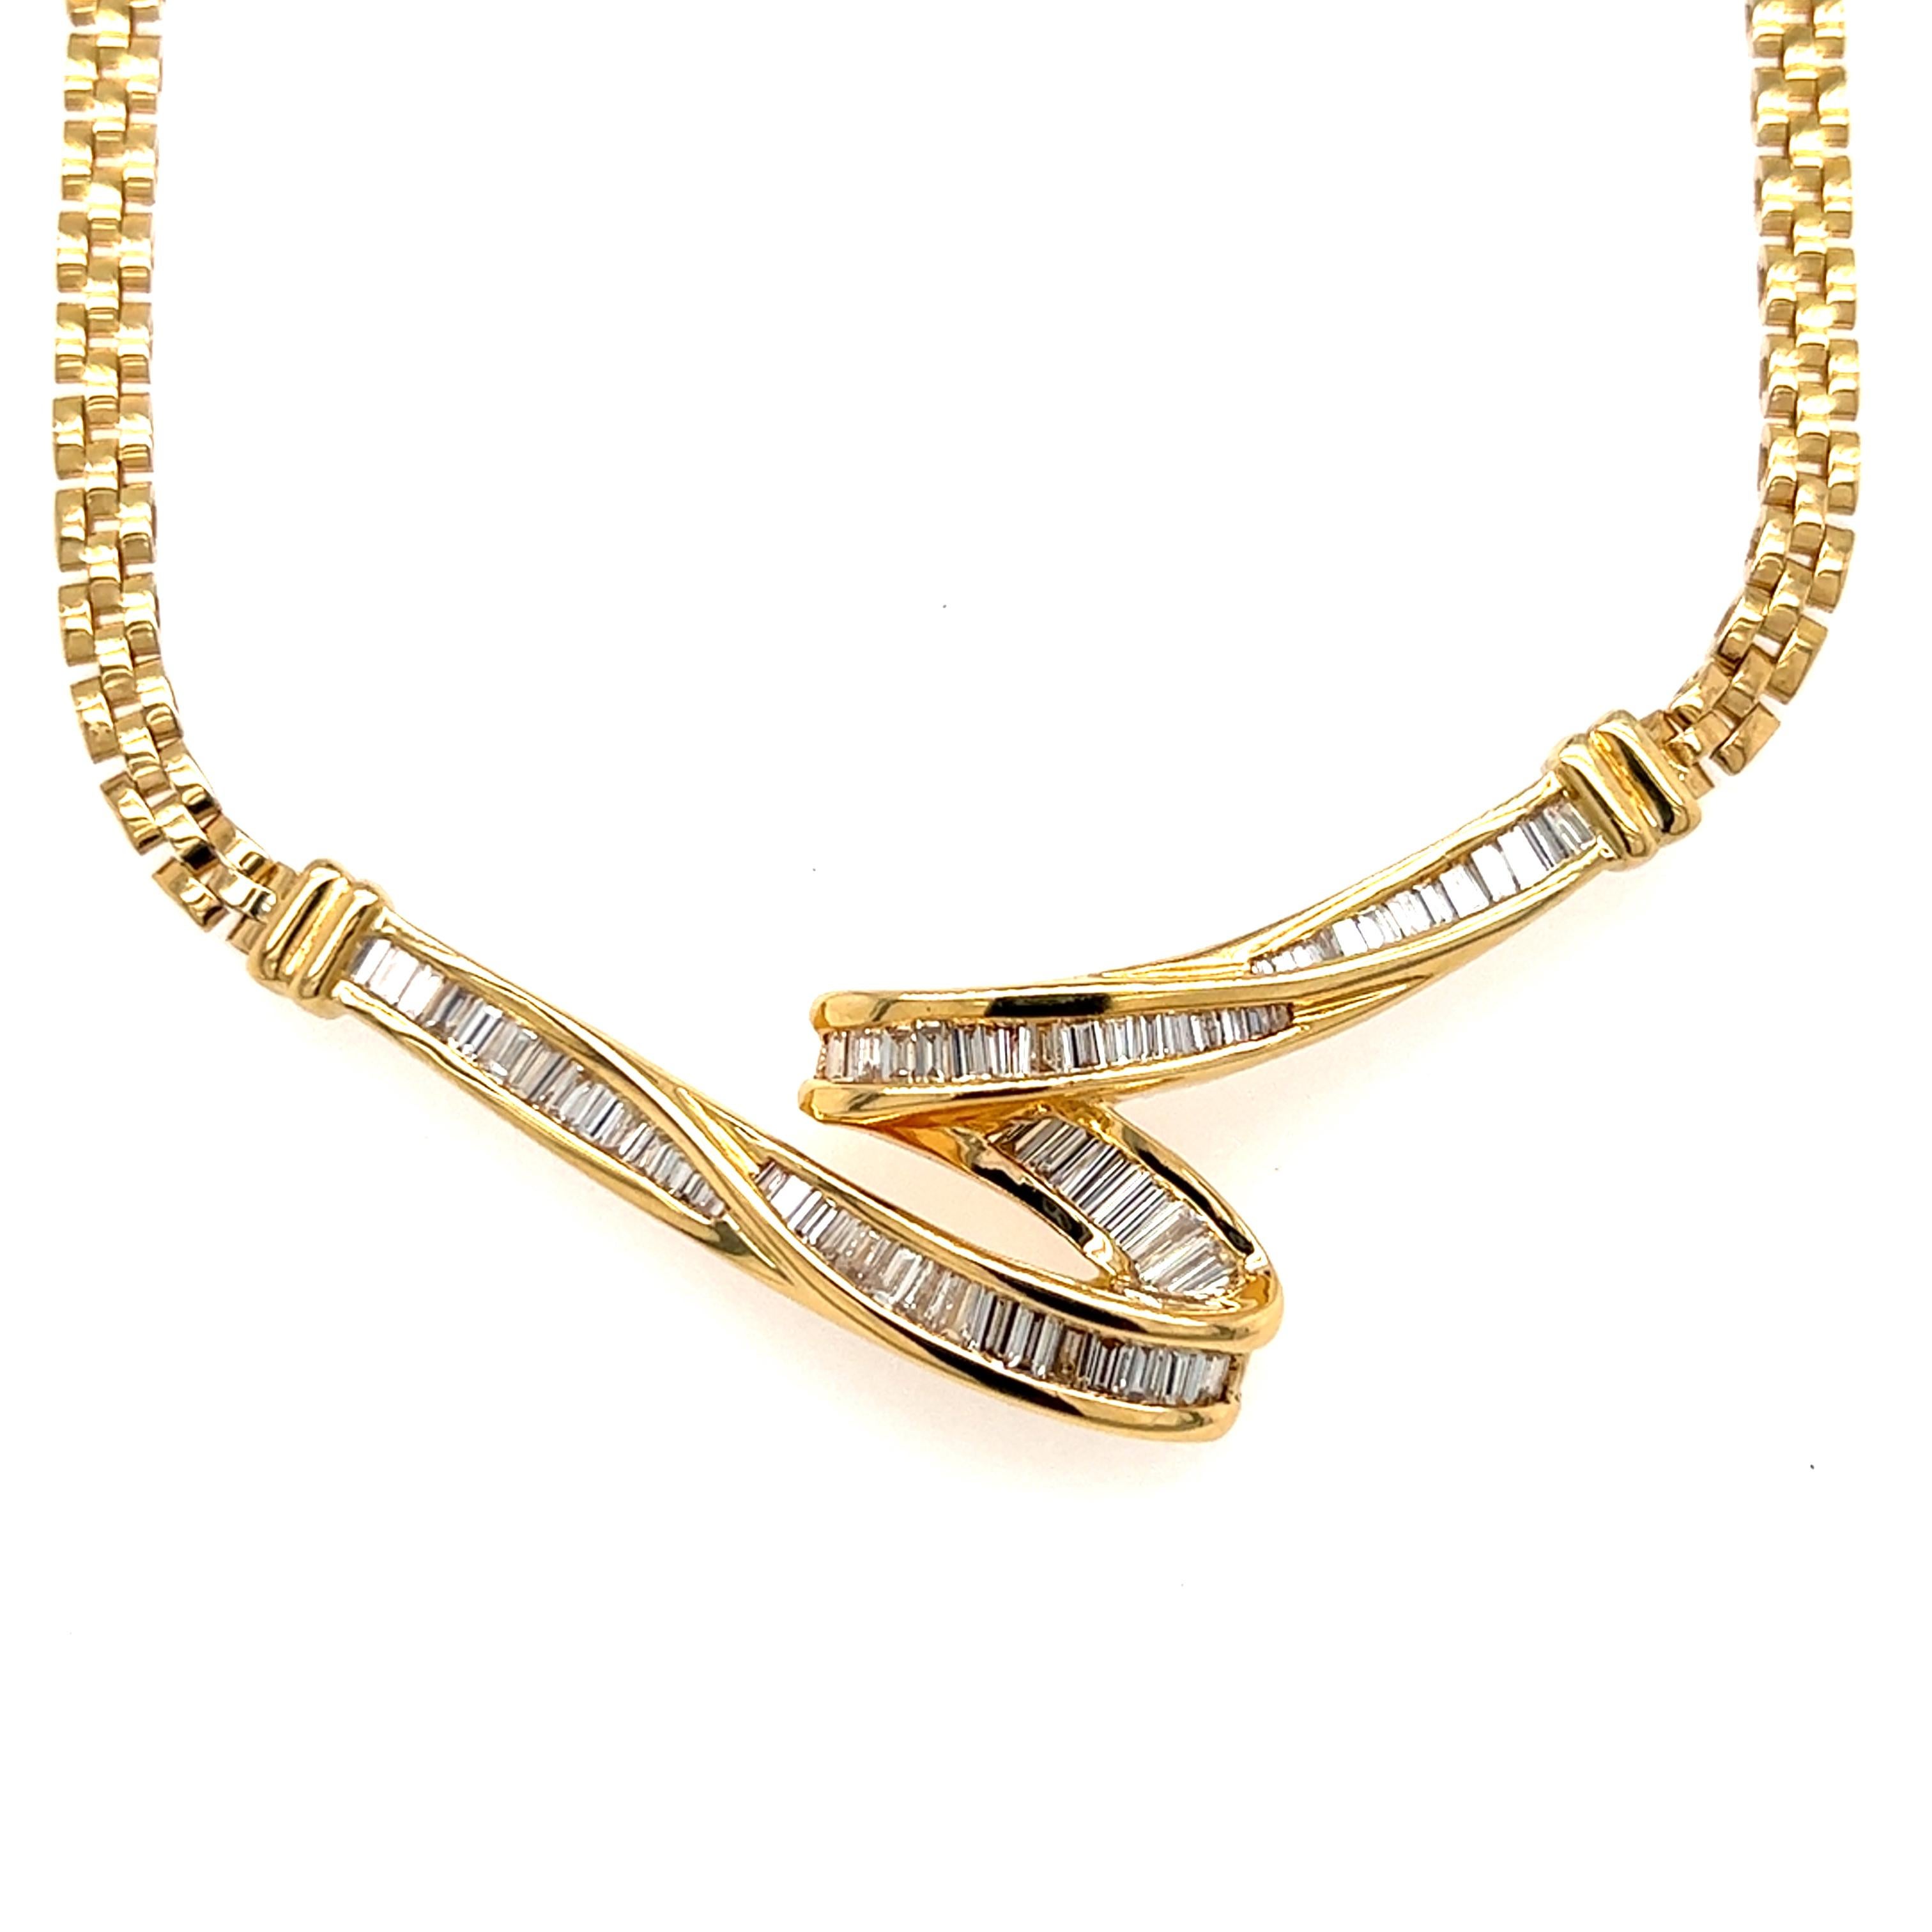 Contemporary Freeform Baguette Diamond Pendant Necklace in 18K Yellow Gold